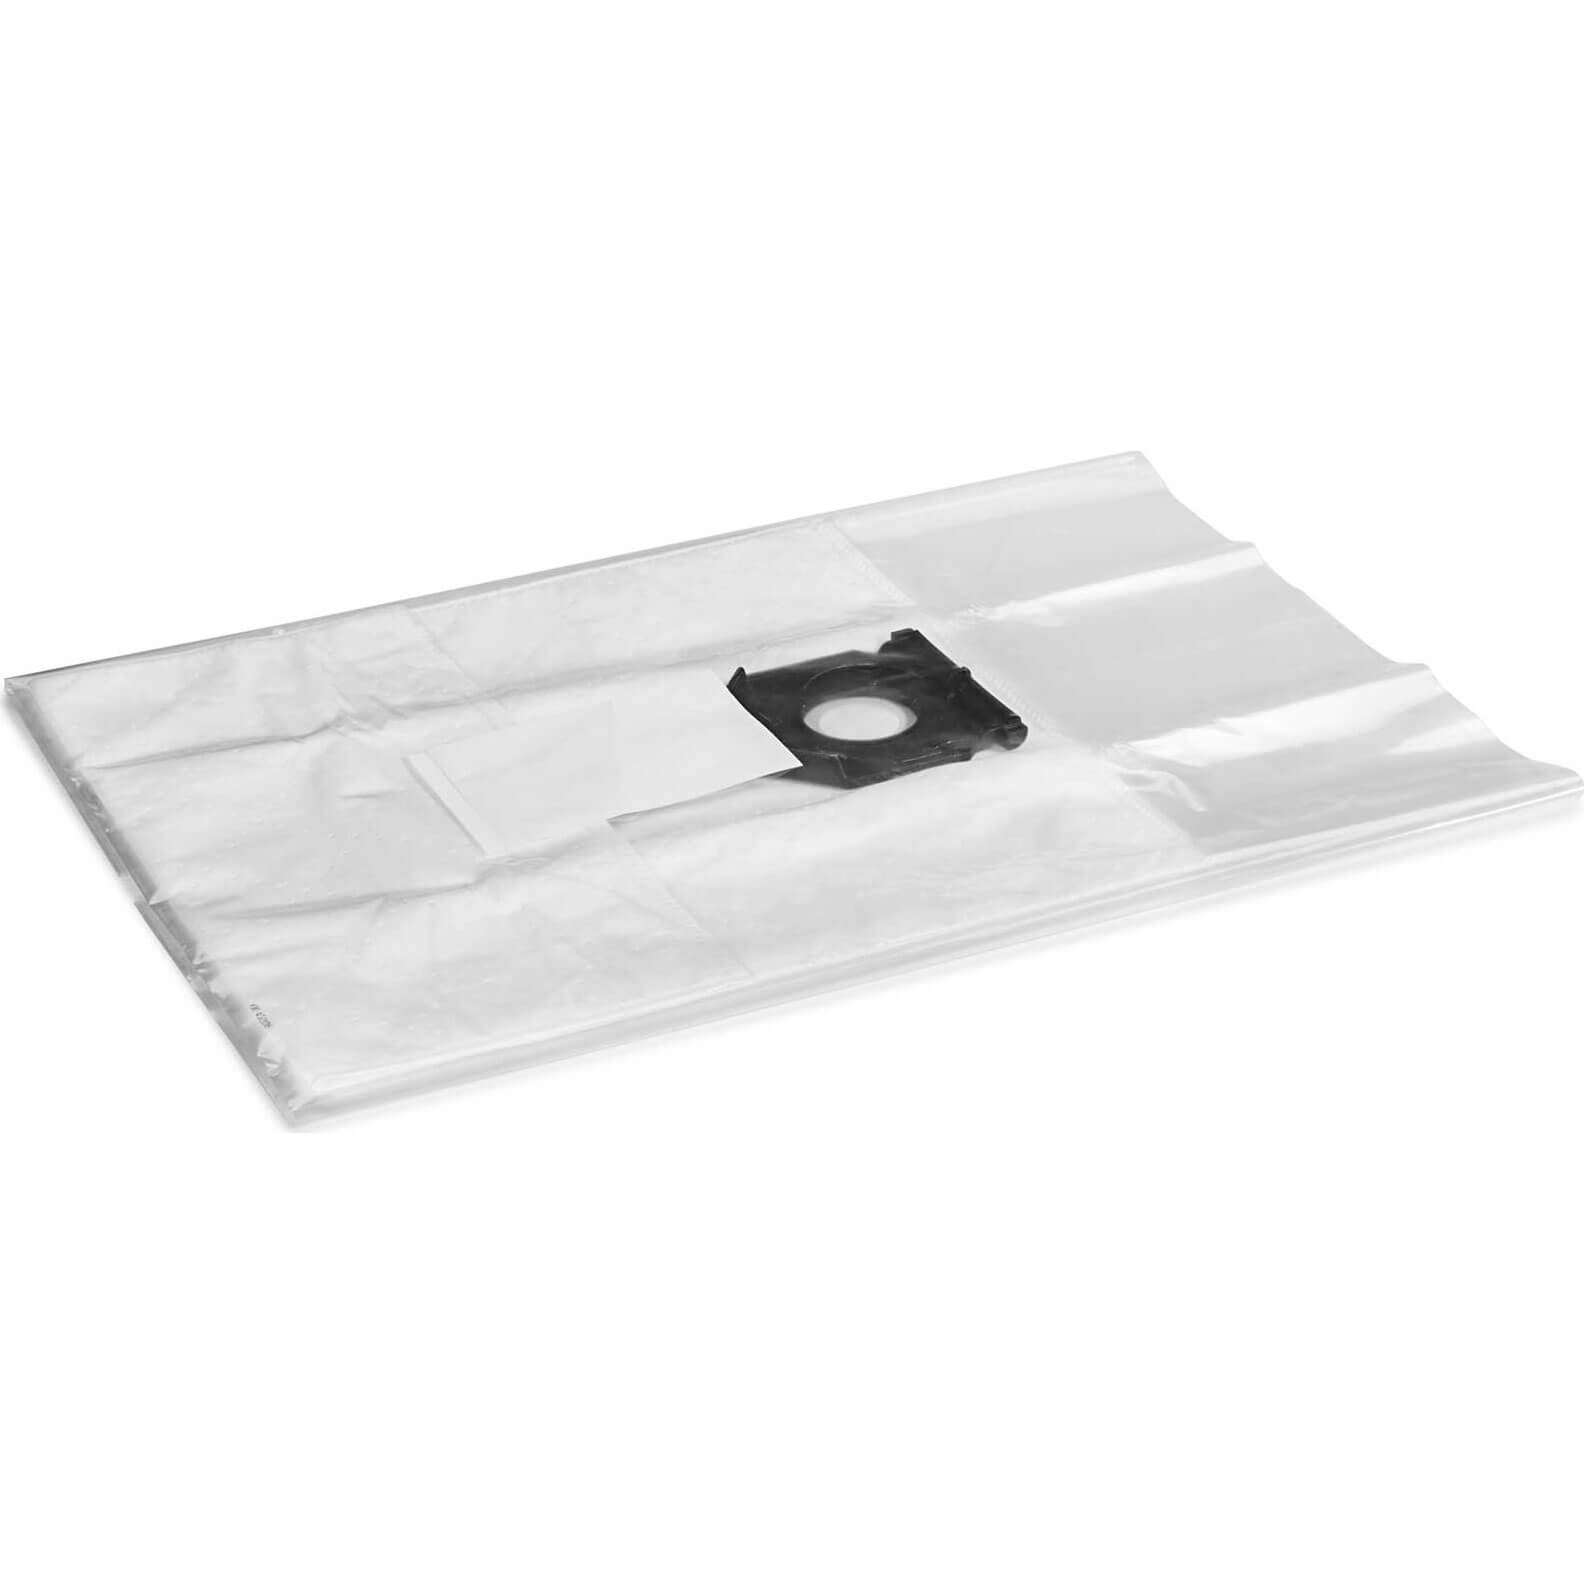 Image of Karcher H Class Safety Filter Dust Bags for NT 30/1 TACT Te Vacuum Cleaners Pack of 5